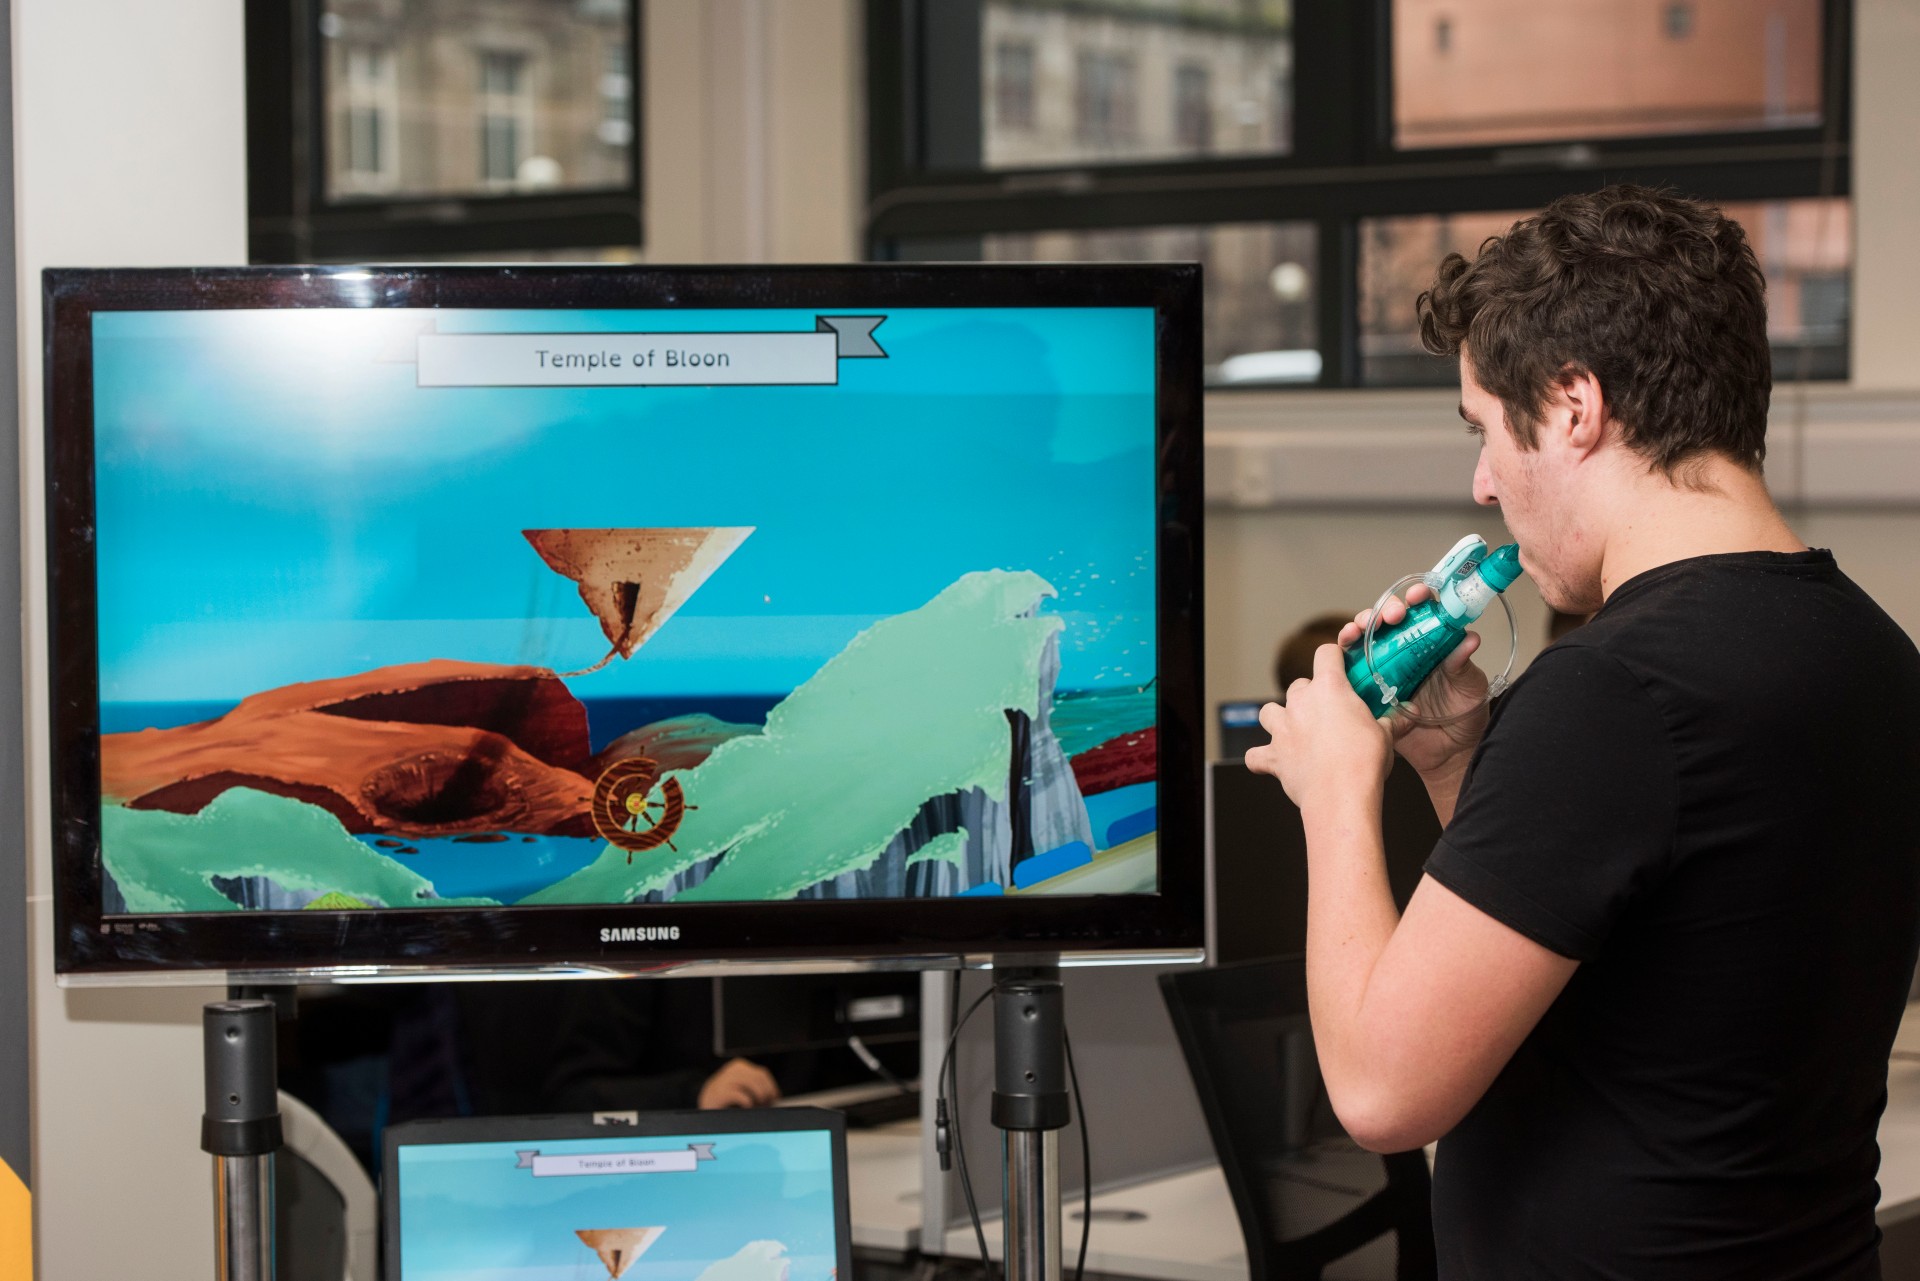 Ground-breaking videogame for cystic fibrosis patients tested at Great Ormond Street Hospital